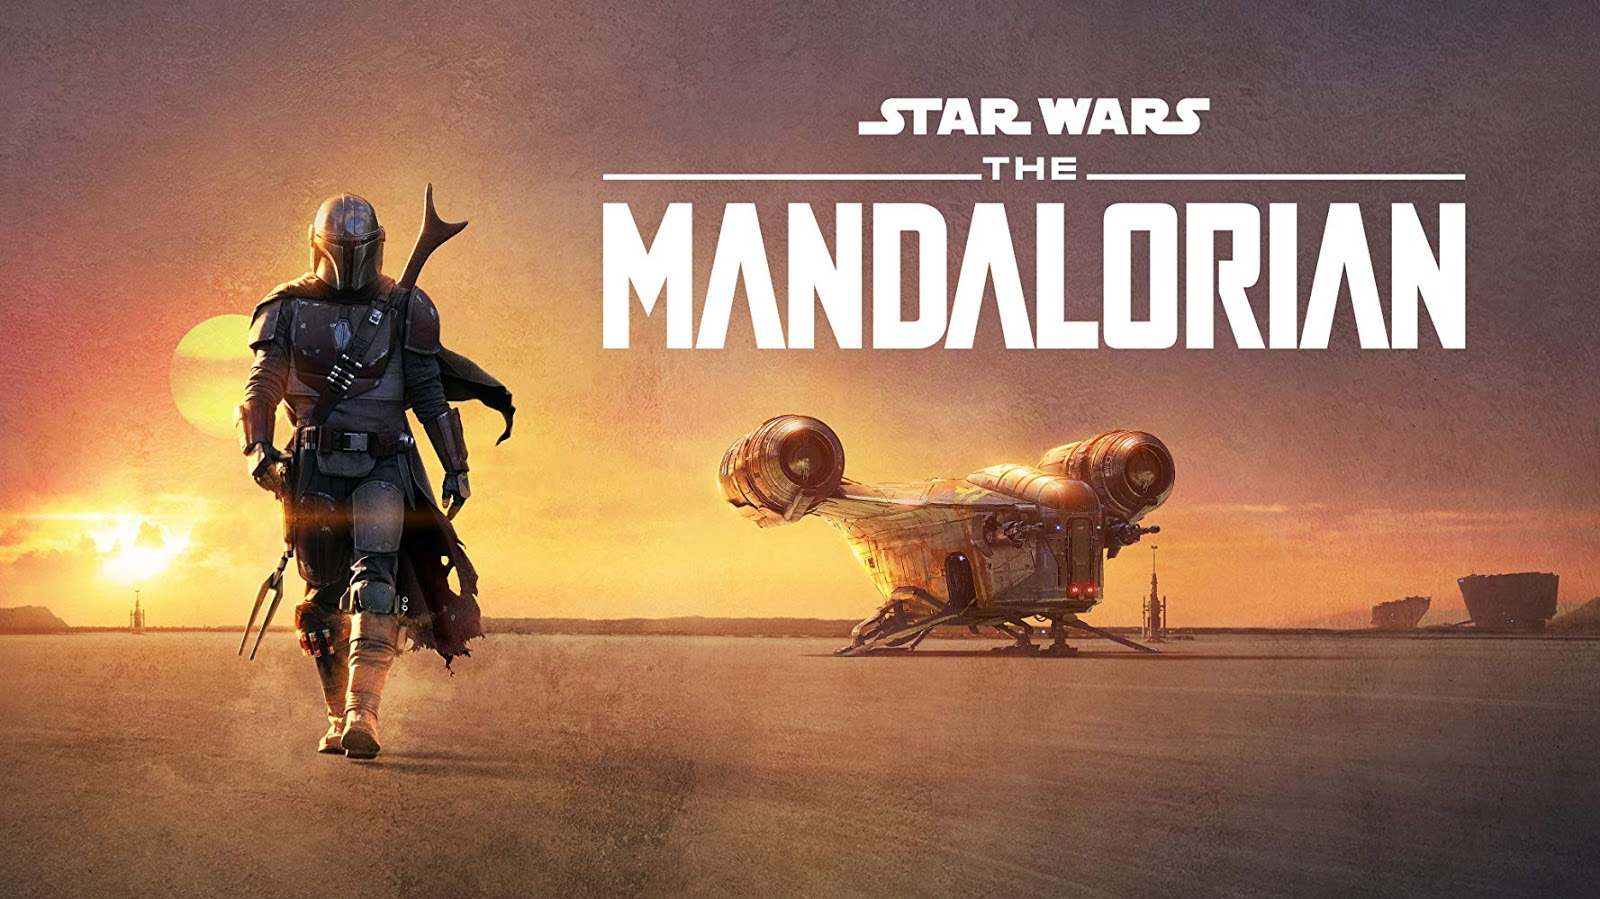 The Mandalorian Trailer + Posters Oficiales